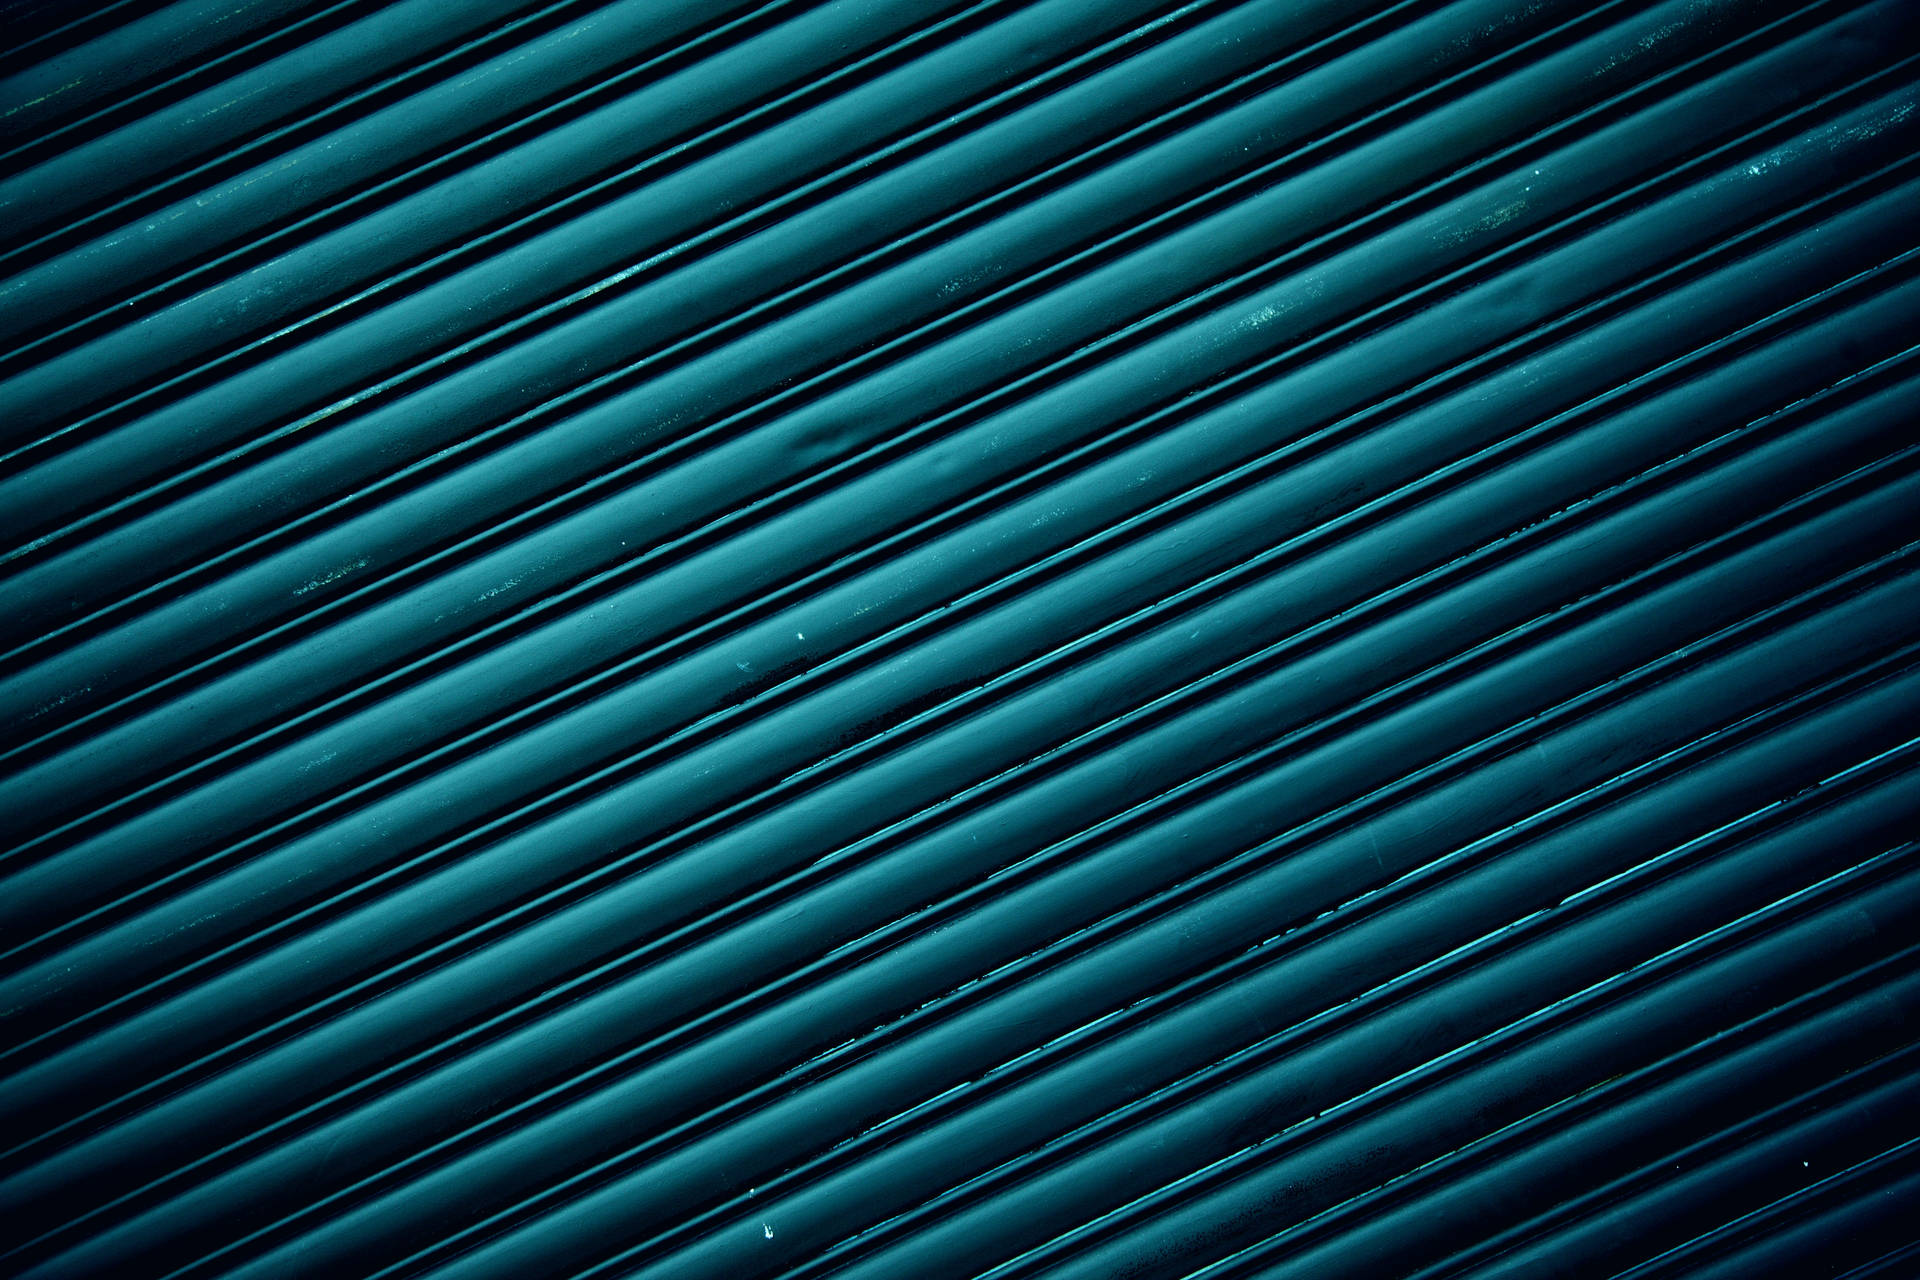 5616X3744 Striped Wallpaper and Background